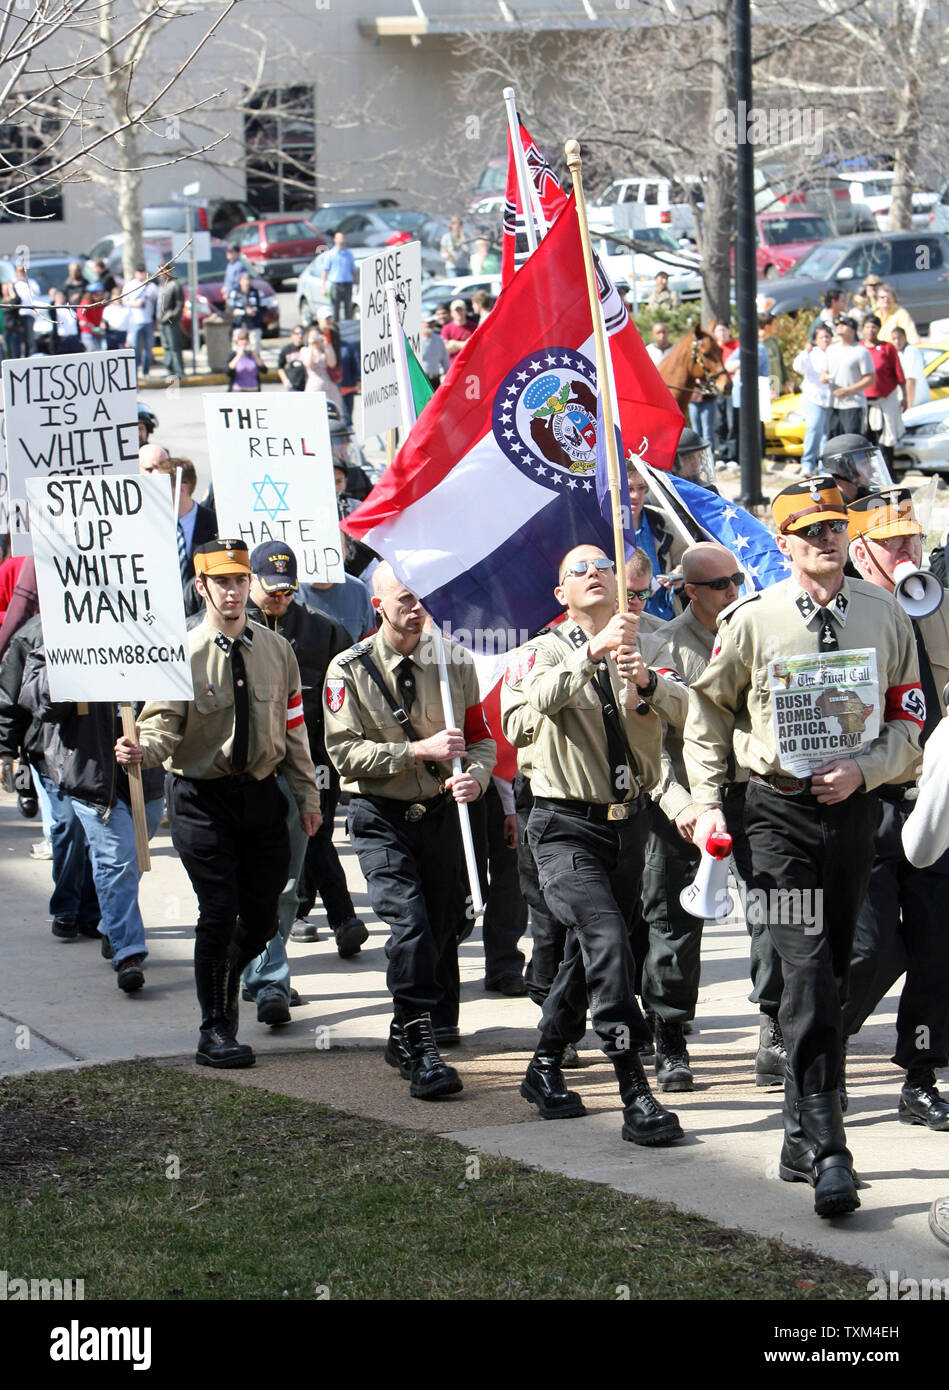 Members of the National Socialist Movement march on the campus of the University of Missouri in Columbia, Missouri on March 10, 2007. About 20 marchers were met by throngs of students that cursed them and tossed eggs into their march. (UPI Photo/Bill Greenblatt) Stock Photo